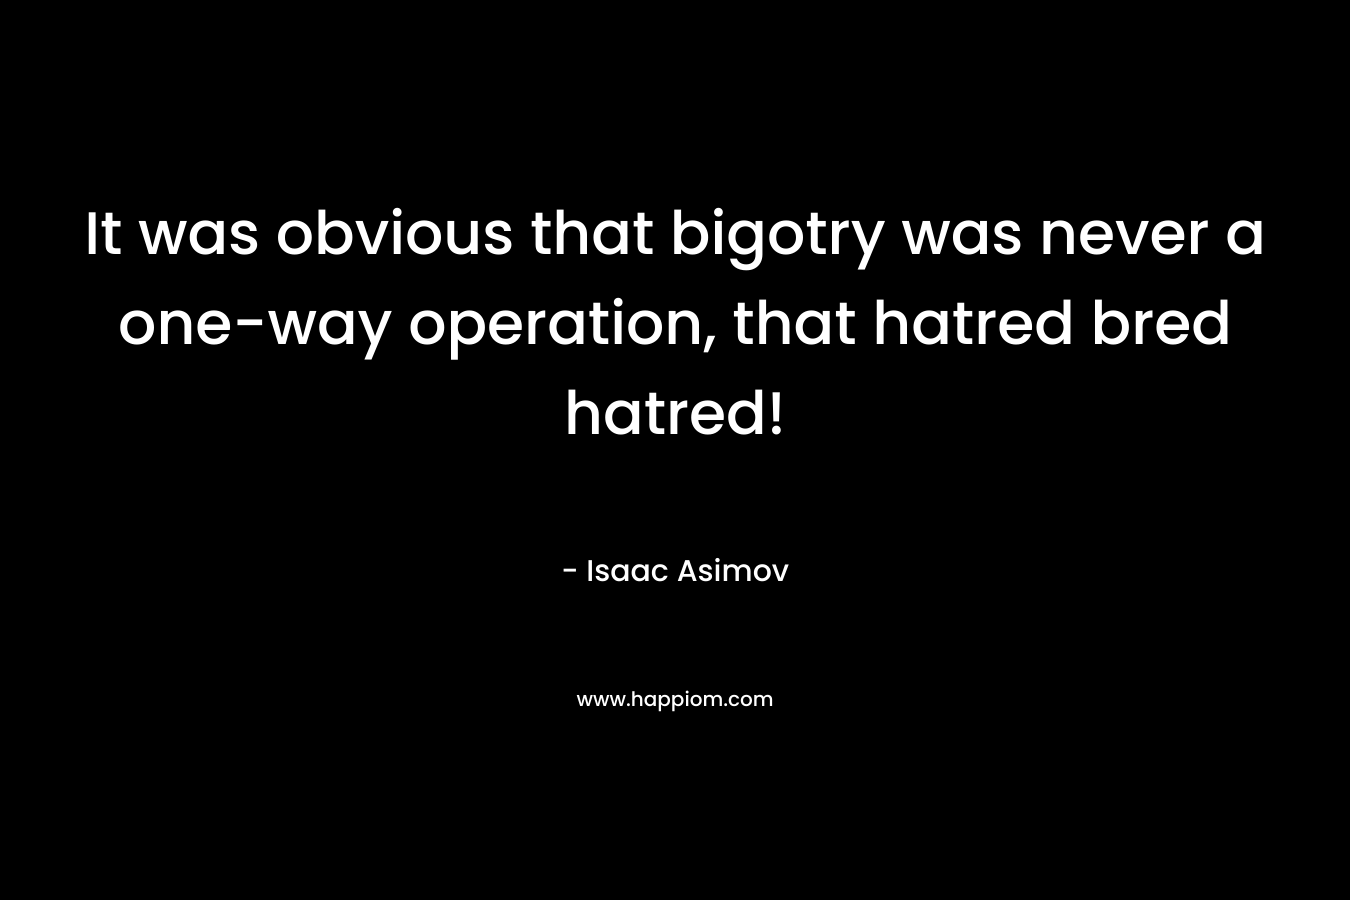 It was obvious that bigotry was never a one-way operation, that hatred bred hatred! – Isaac Asimov